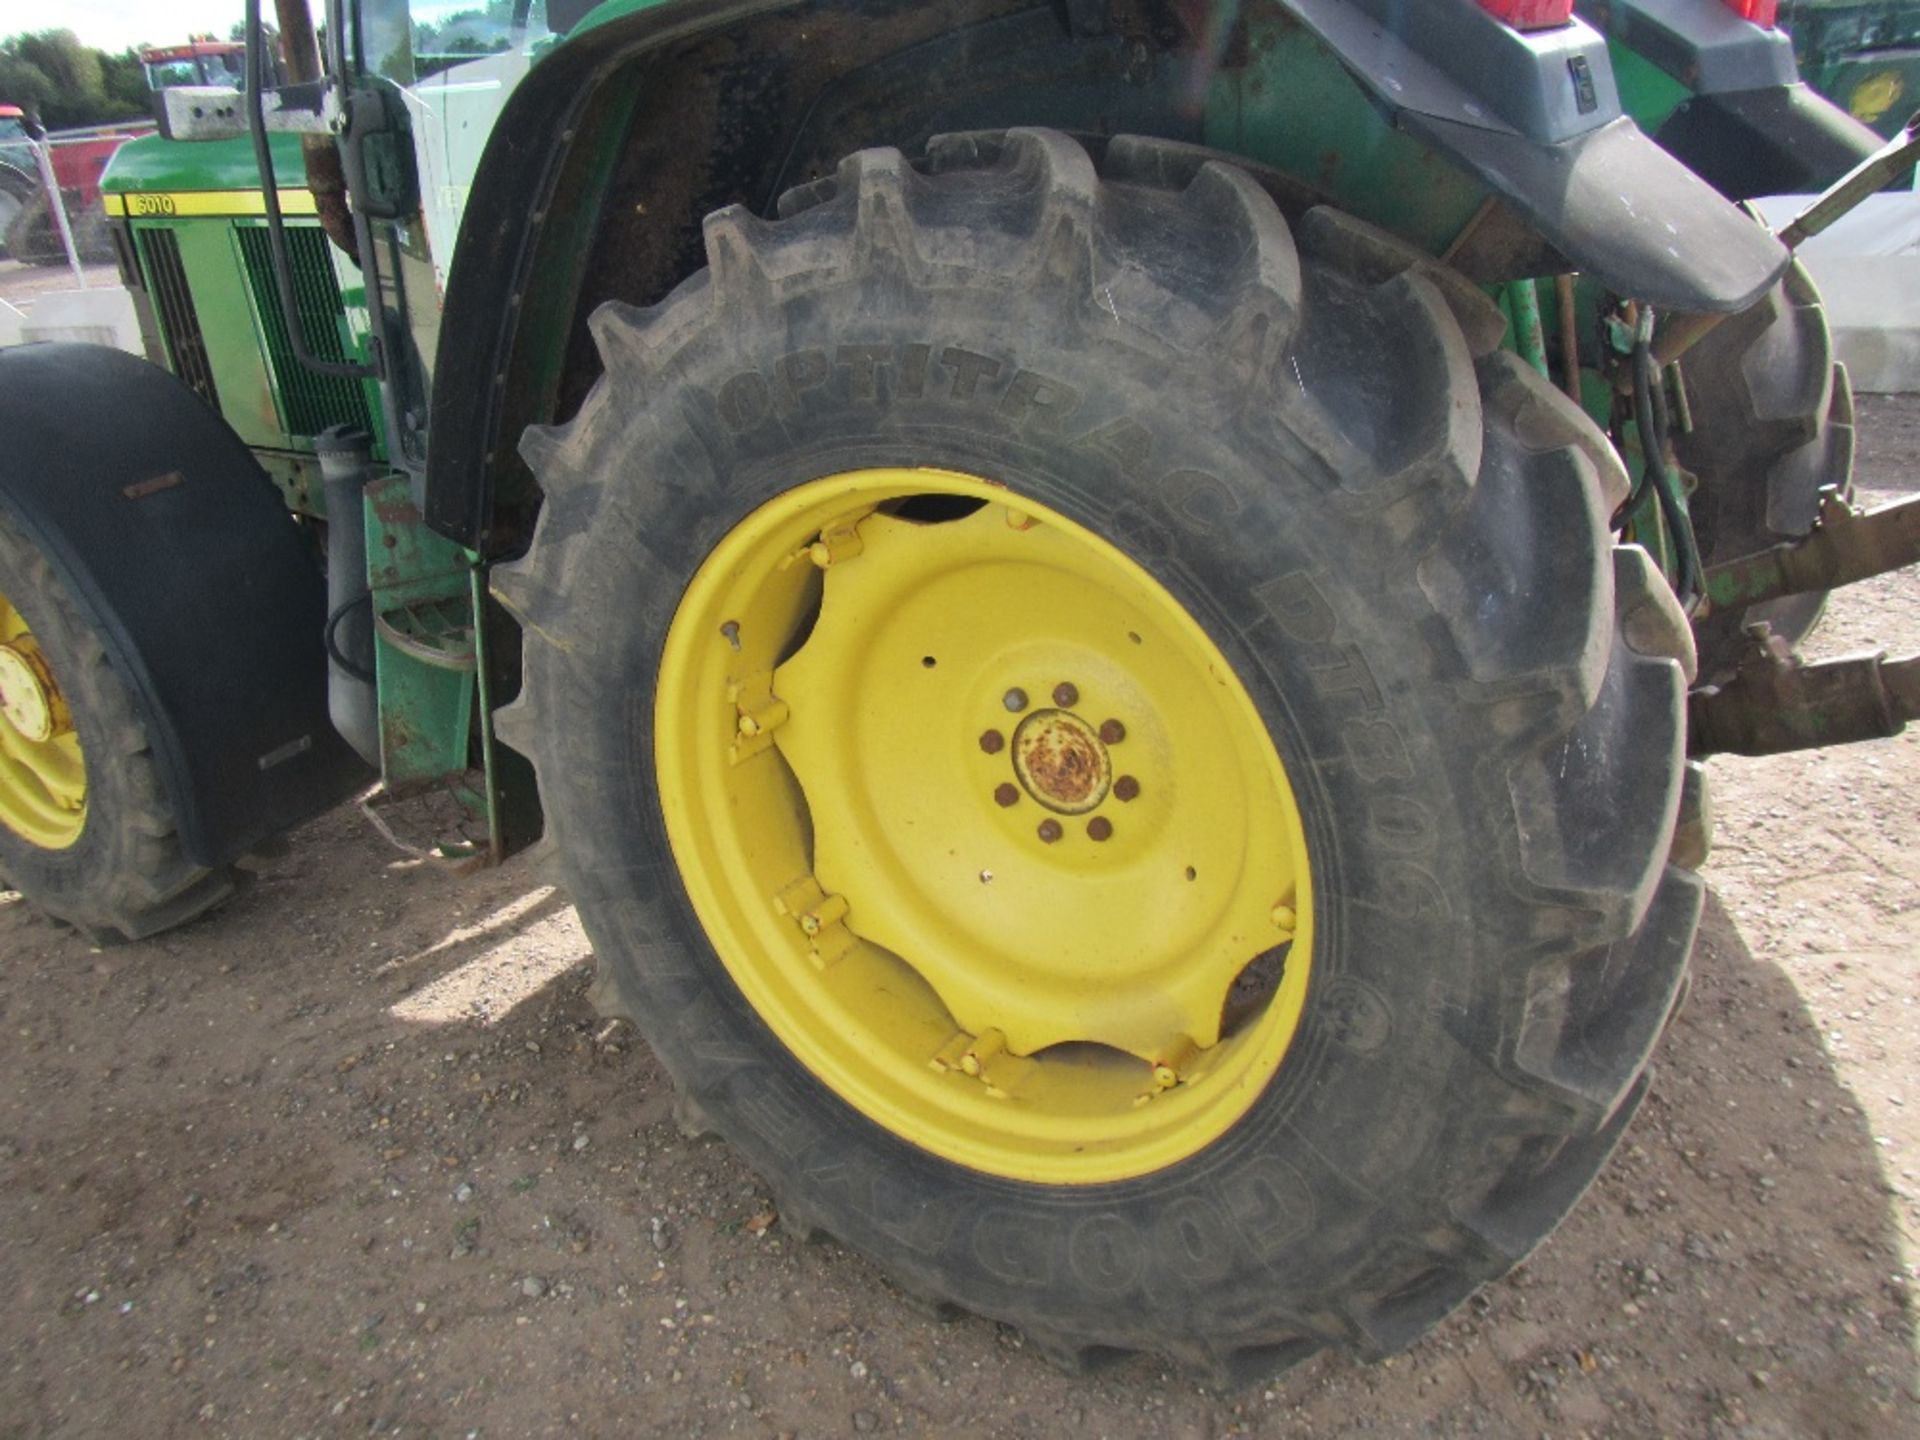 2000 John Deere 6010 4wd Tractor with Air Con & Creeper Gear. From Veg Rig. 4542 hrs. Reg No X153 - Image 10 of 17